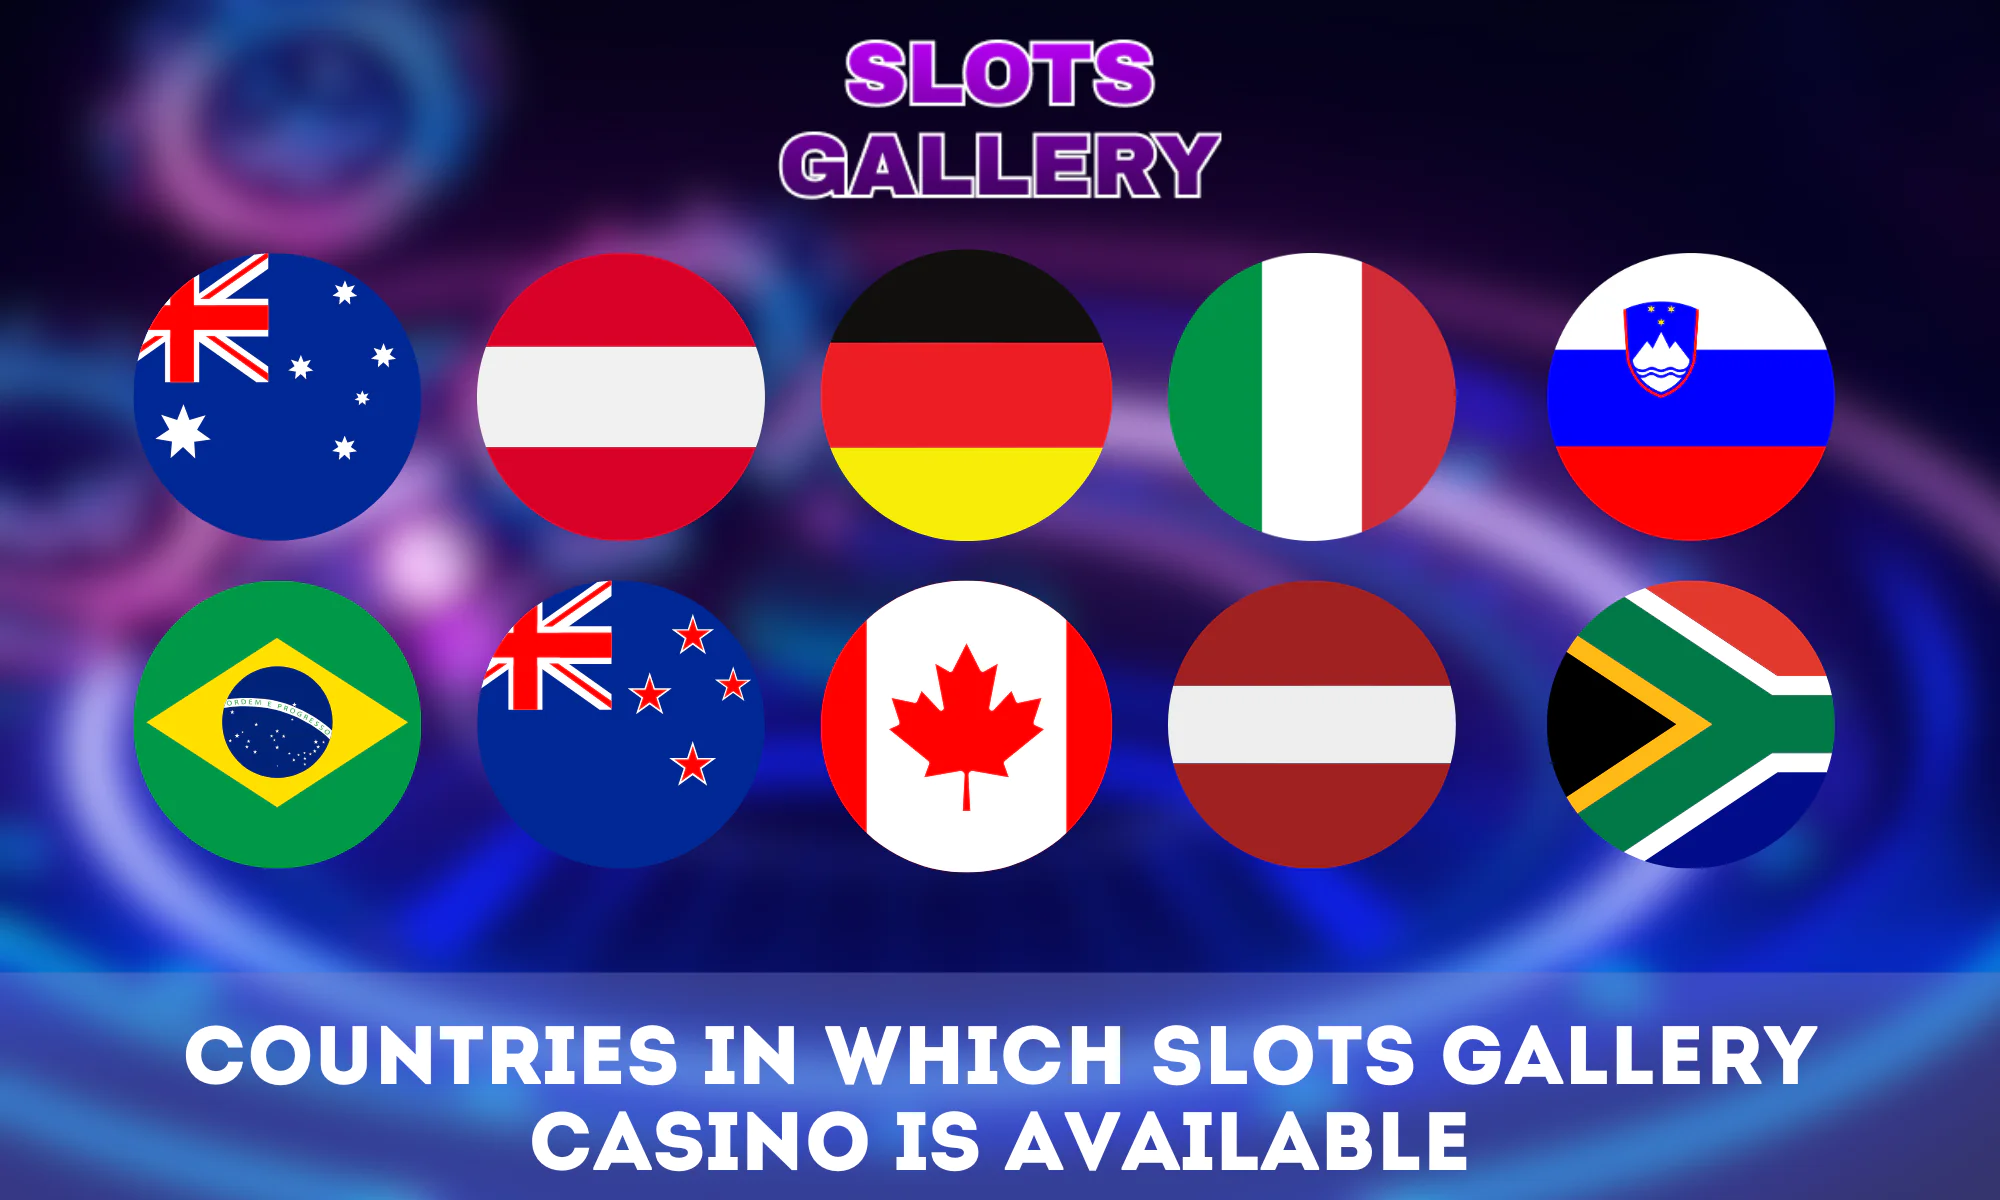 List of the main countries where Slots Gallery Casino operates